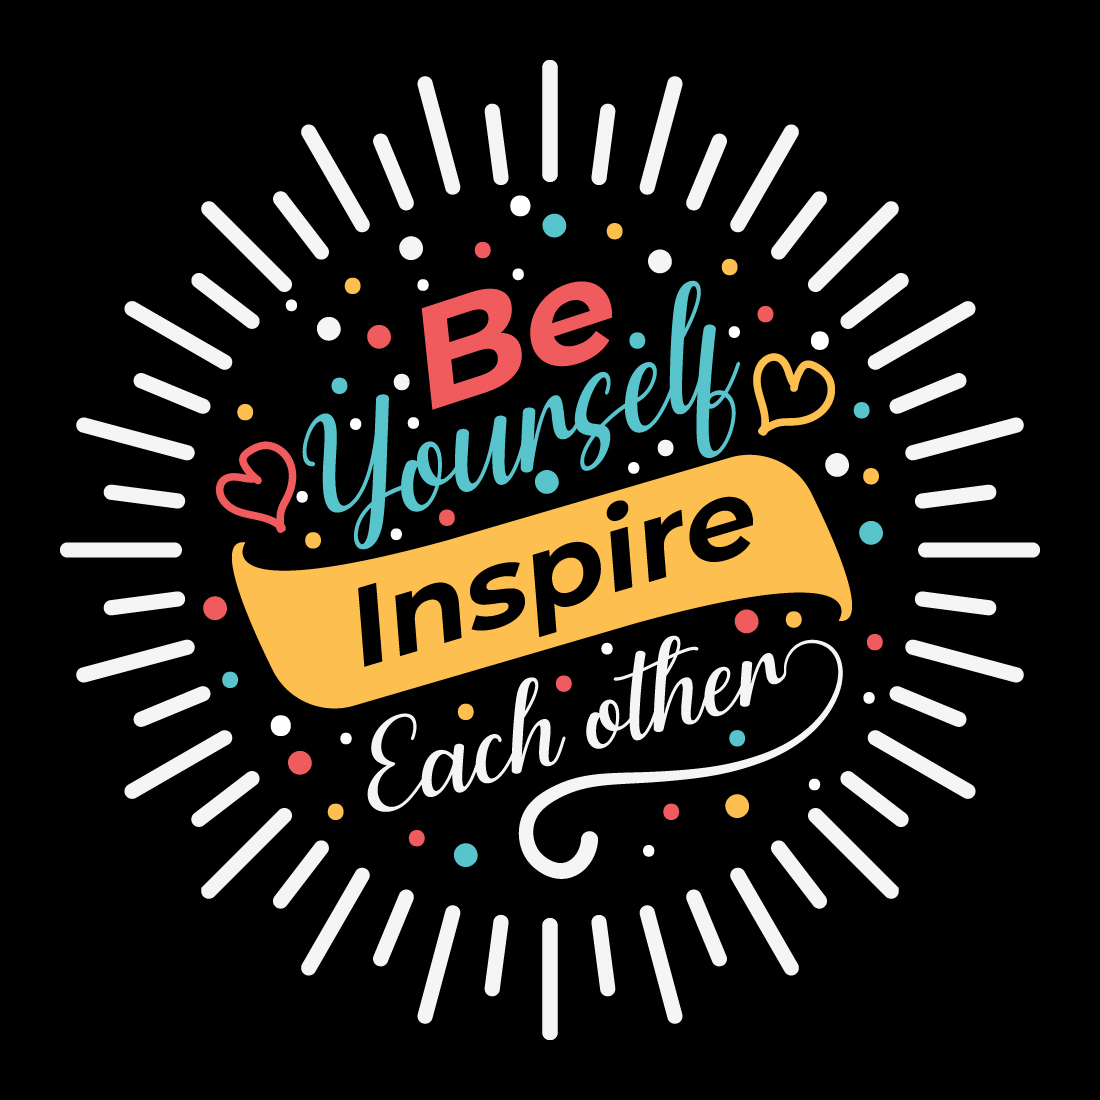 Quote that says be yourself inspire each other.